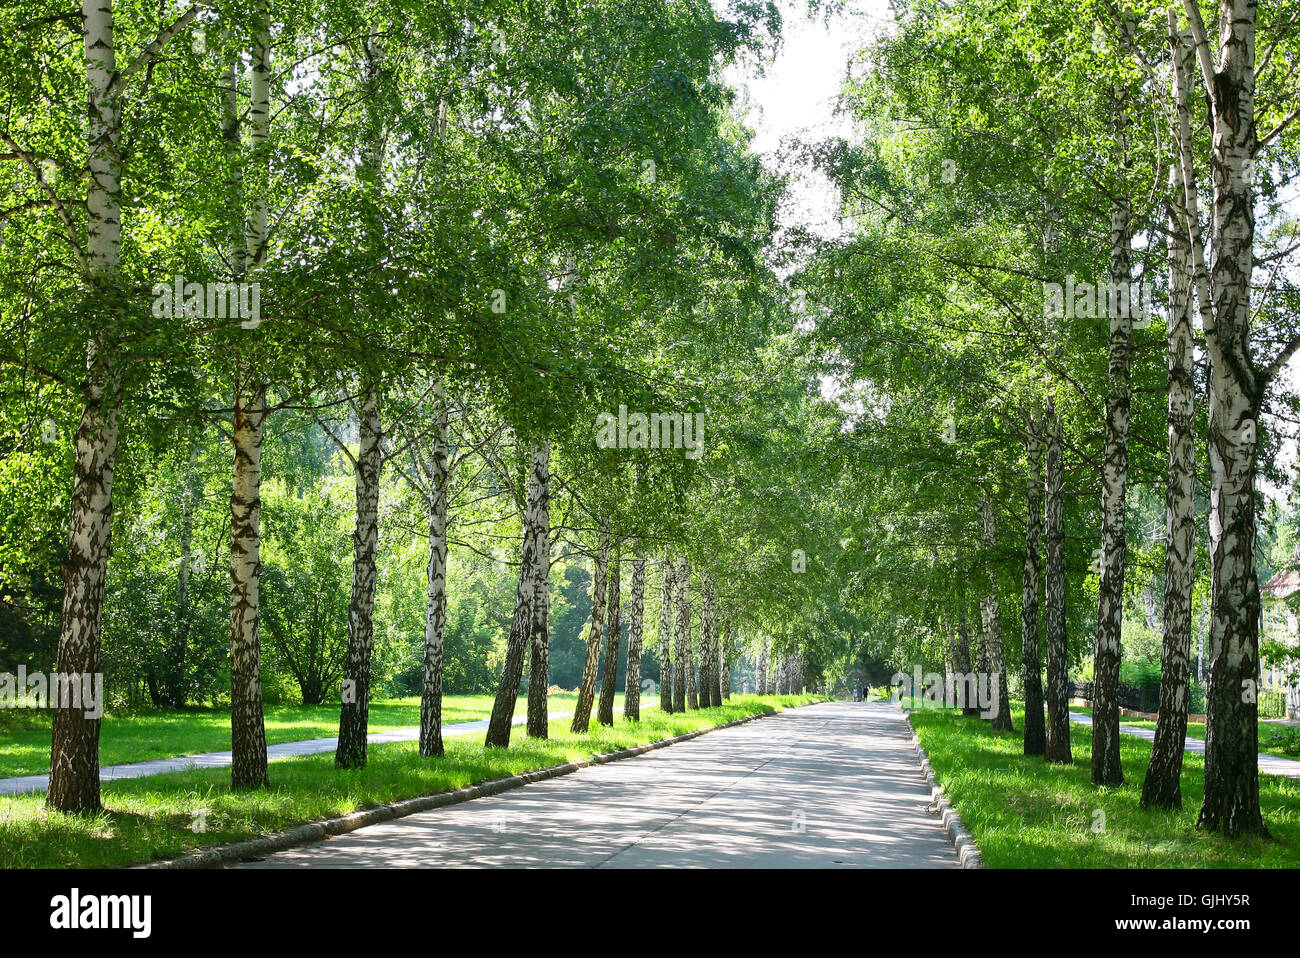 Summer alley of birch trees in sunny day Stock Photo